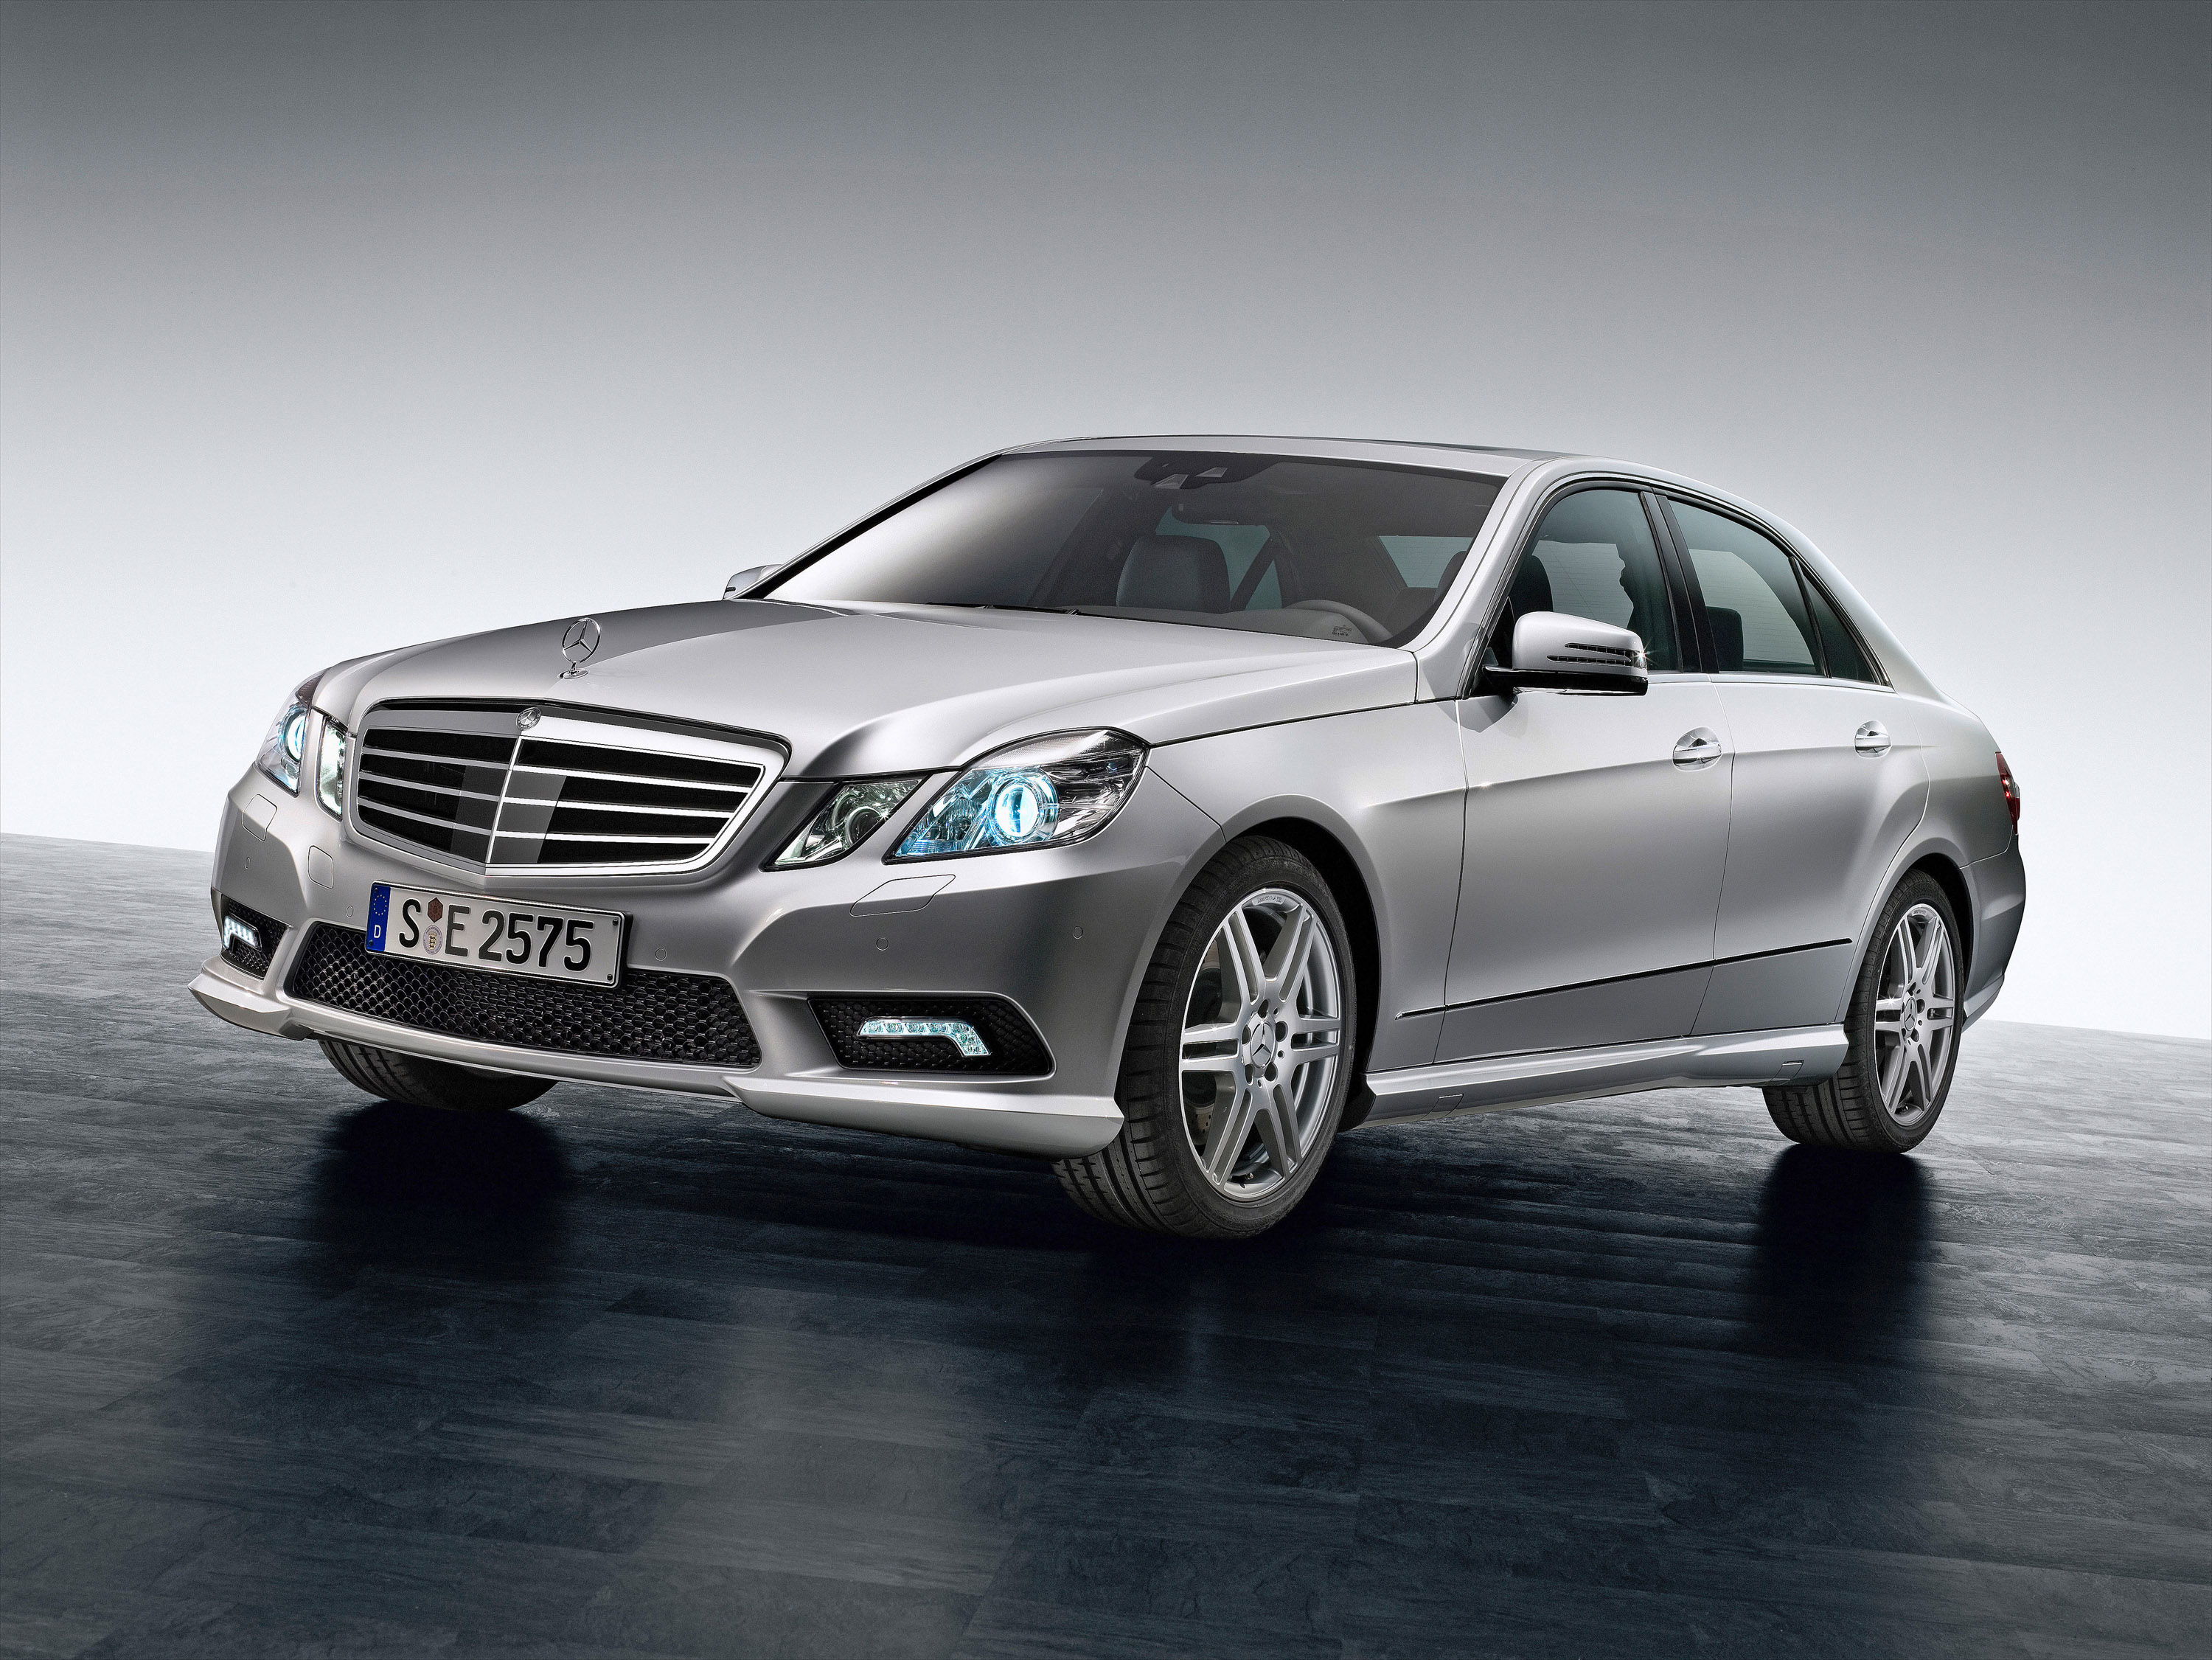 AMG sports package for the new E-Class